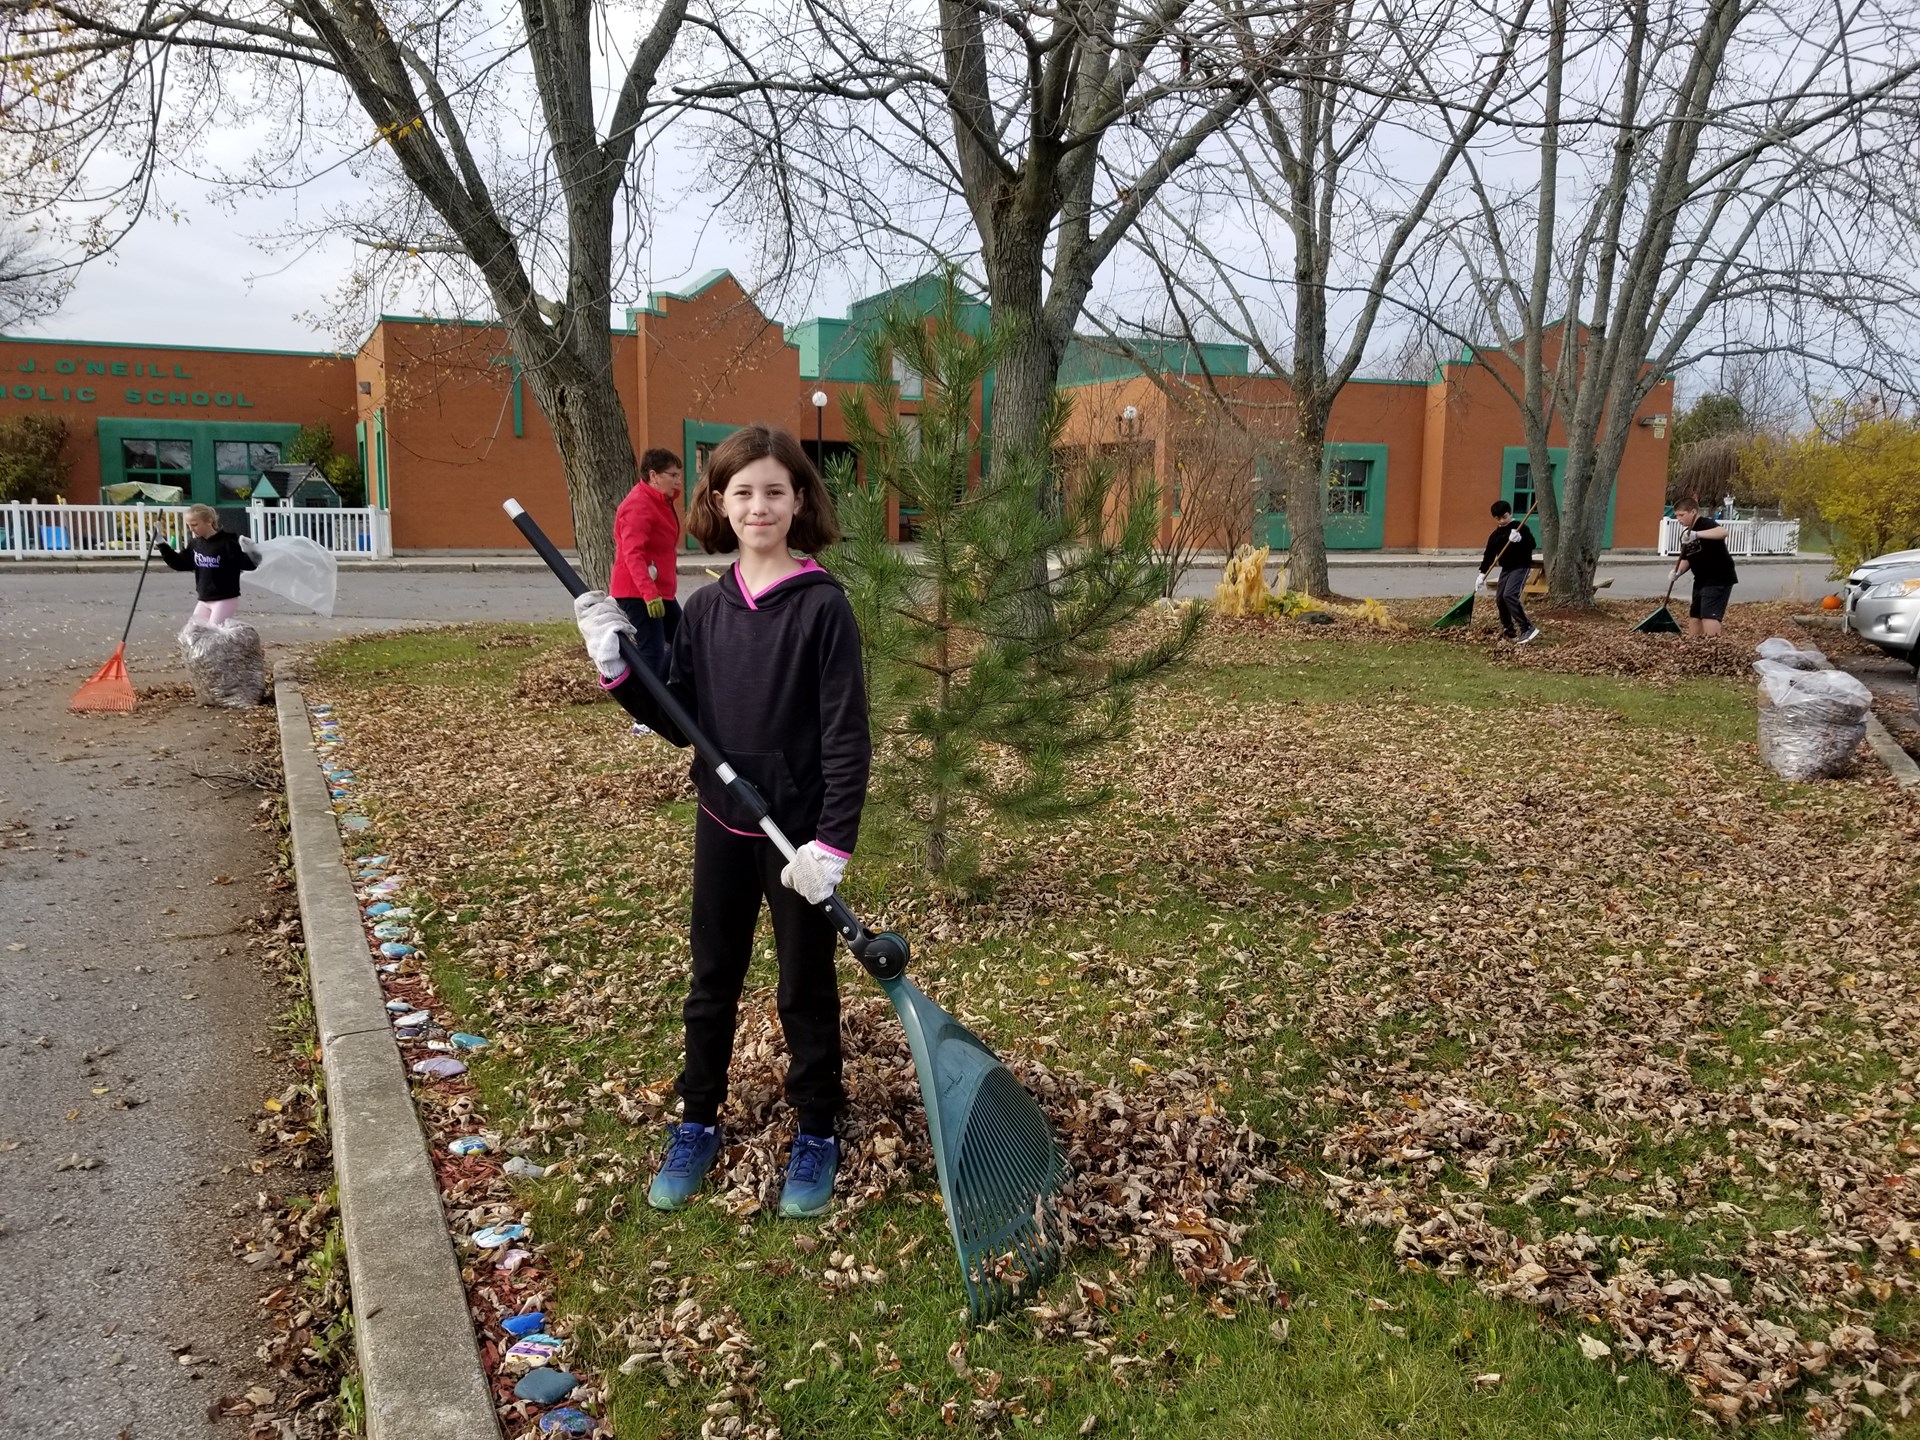 Students raking and cleaning up school yard.